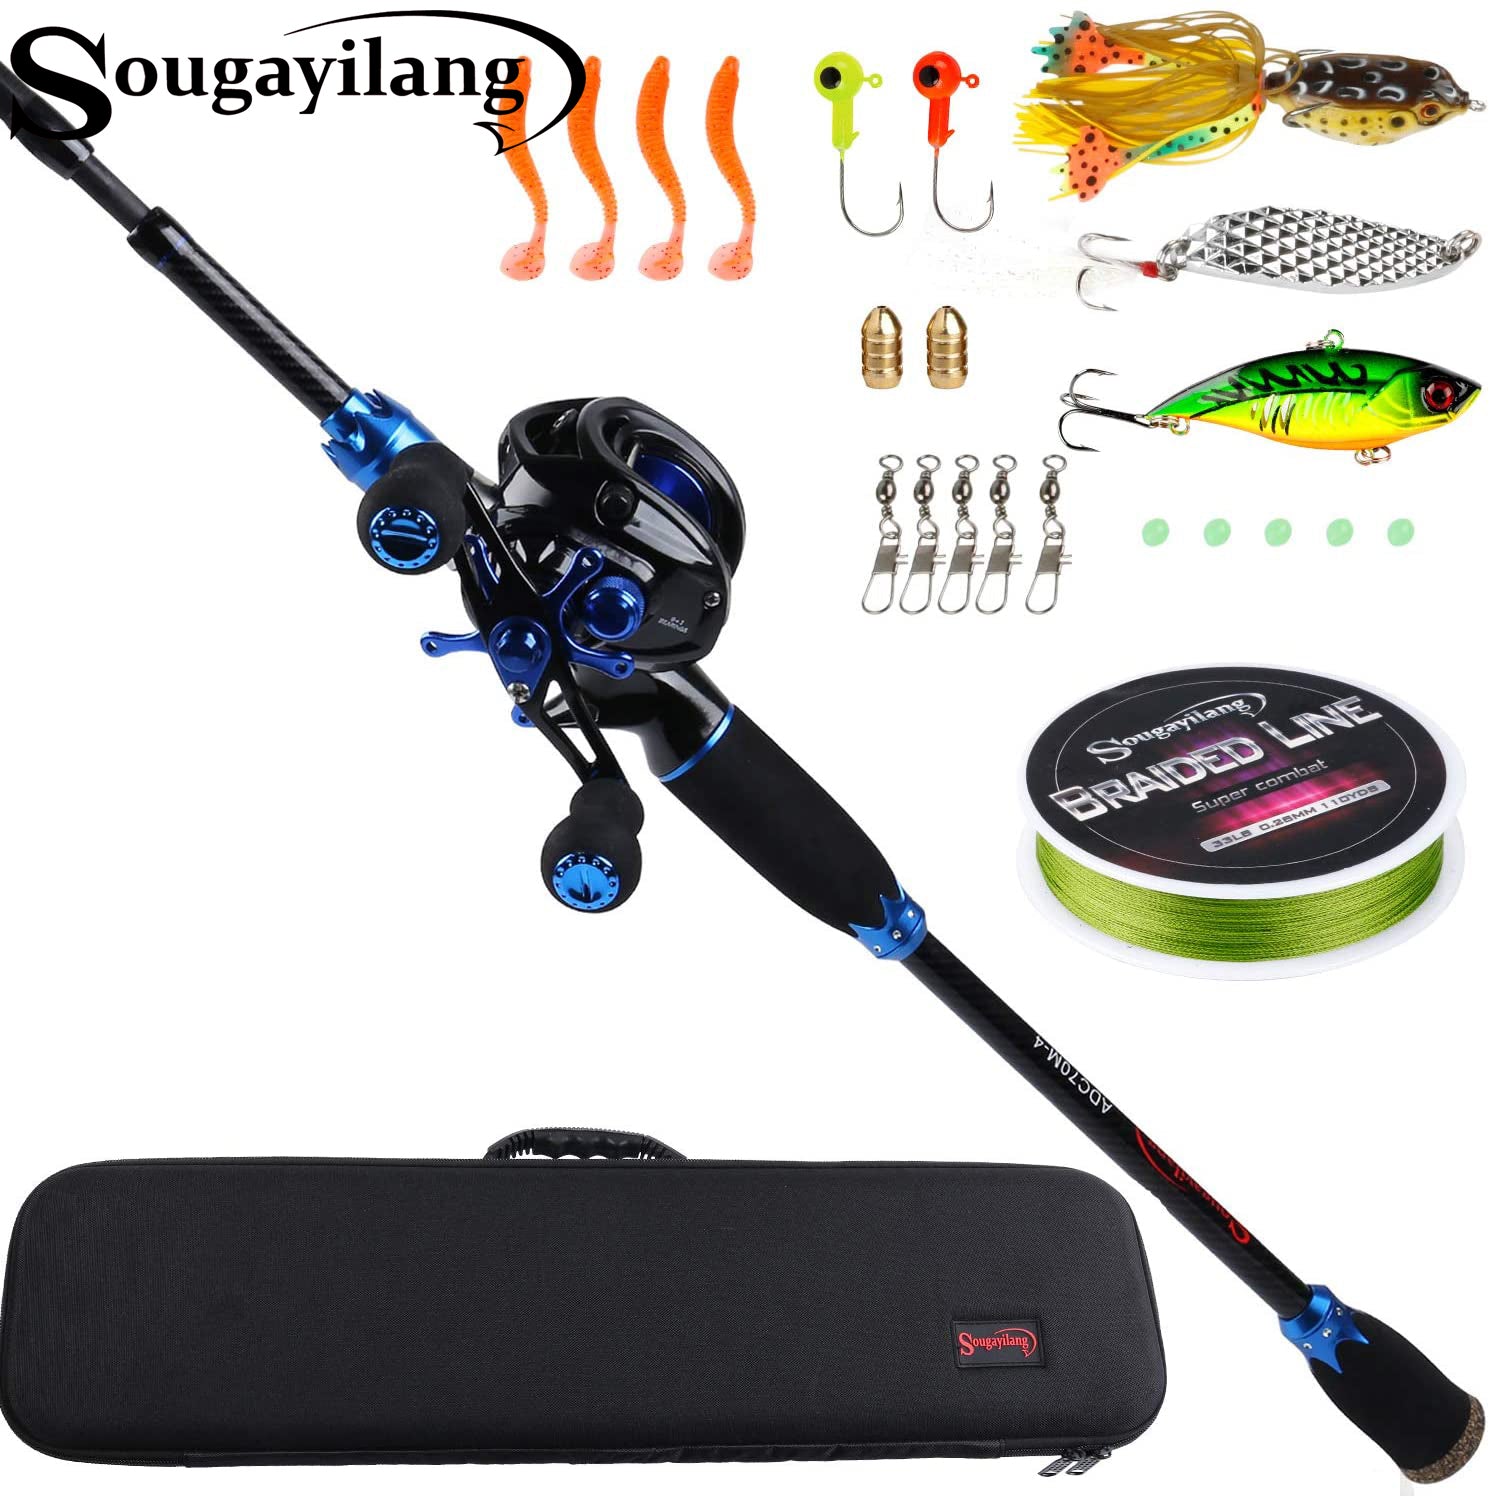 Sougayilang Fishing Rod and Reel Combos,24-Ton Carbon Fiber Fishing Poles  with Baitcasting Reel,7.0:1 Gear for Travel Freshwater